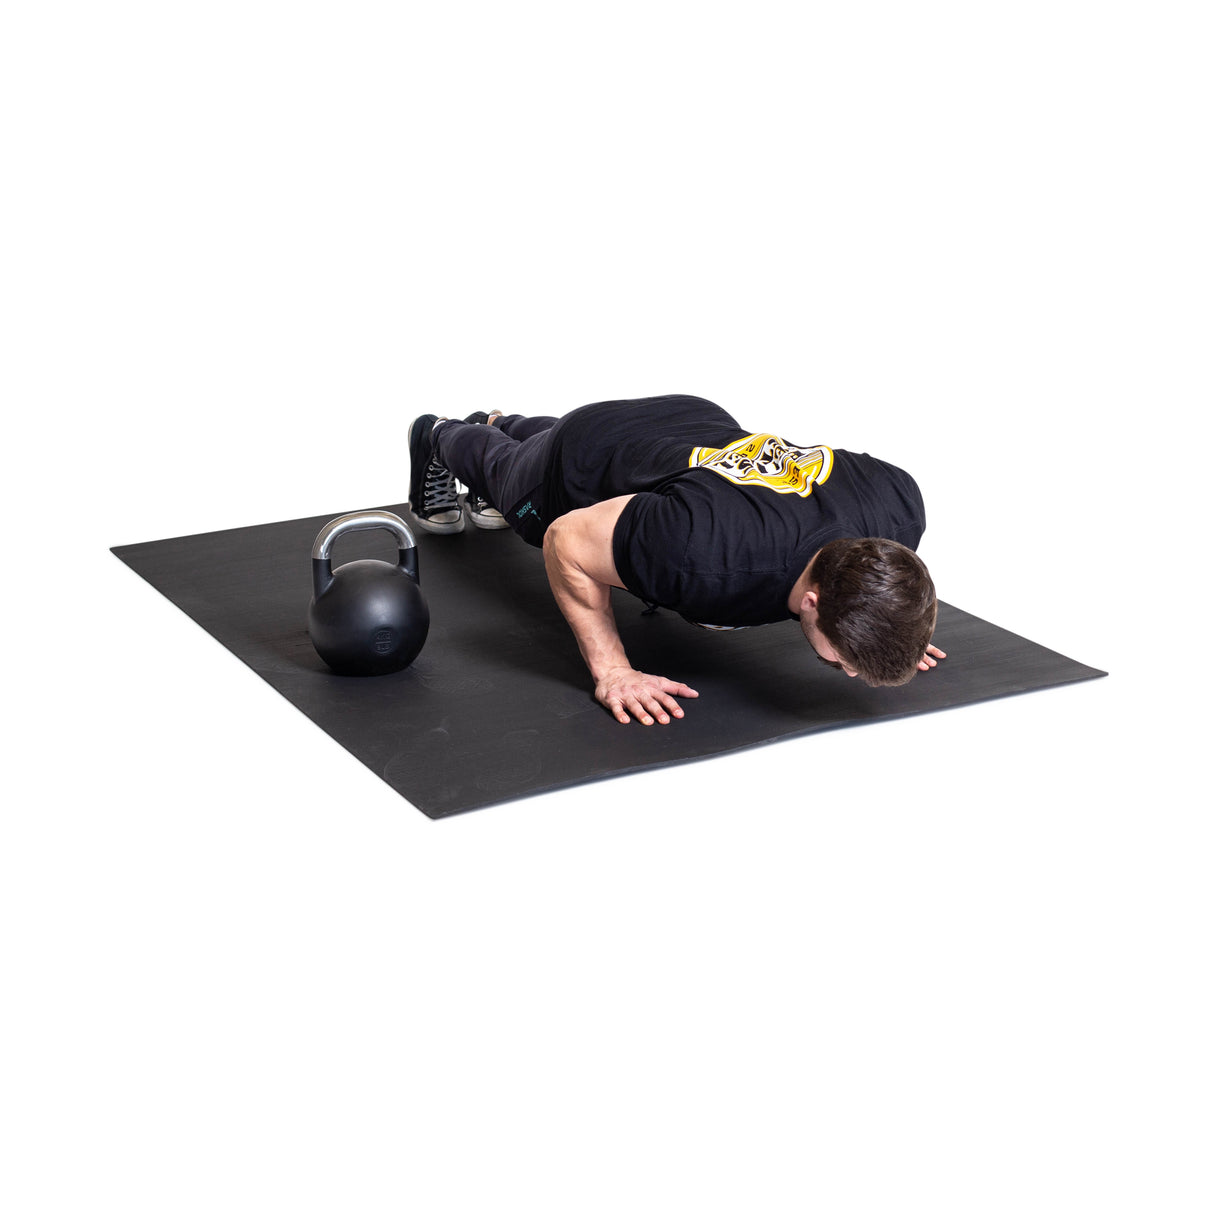 male athlete using the 4' x 6' Rubber Floor Mat for push-ups